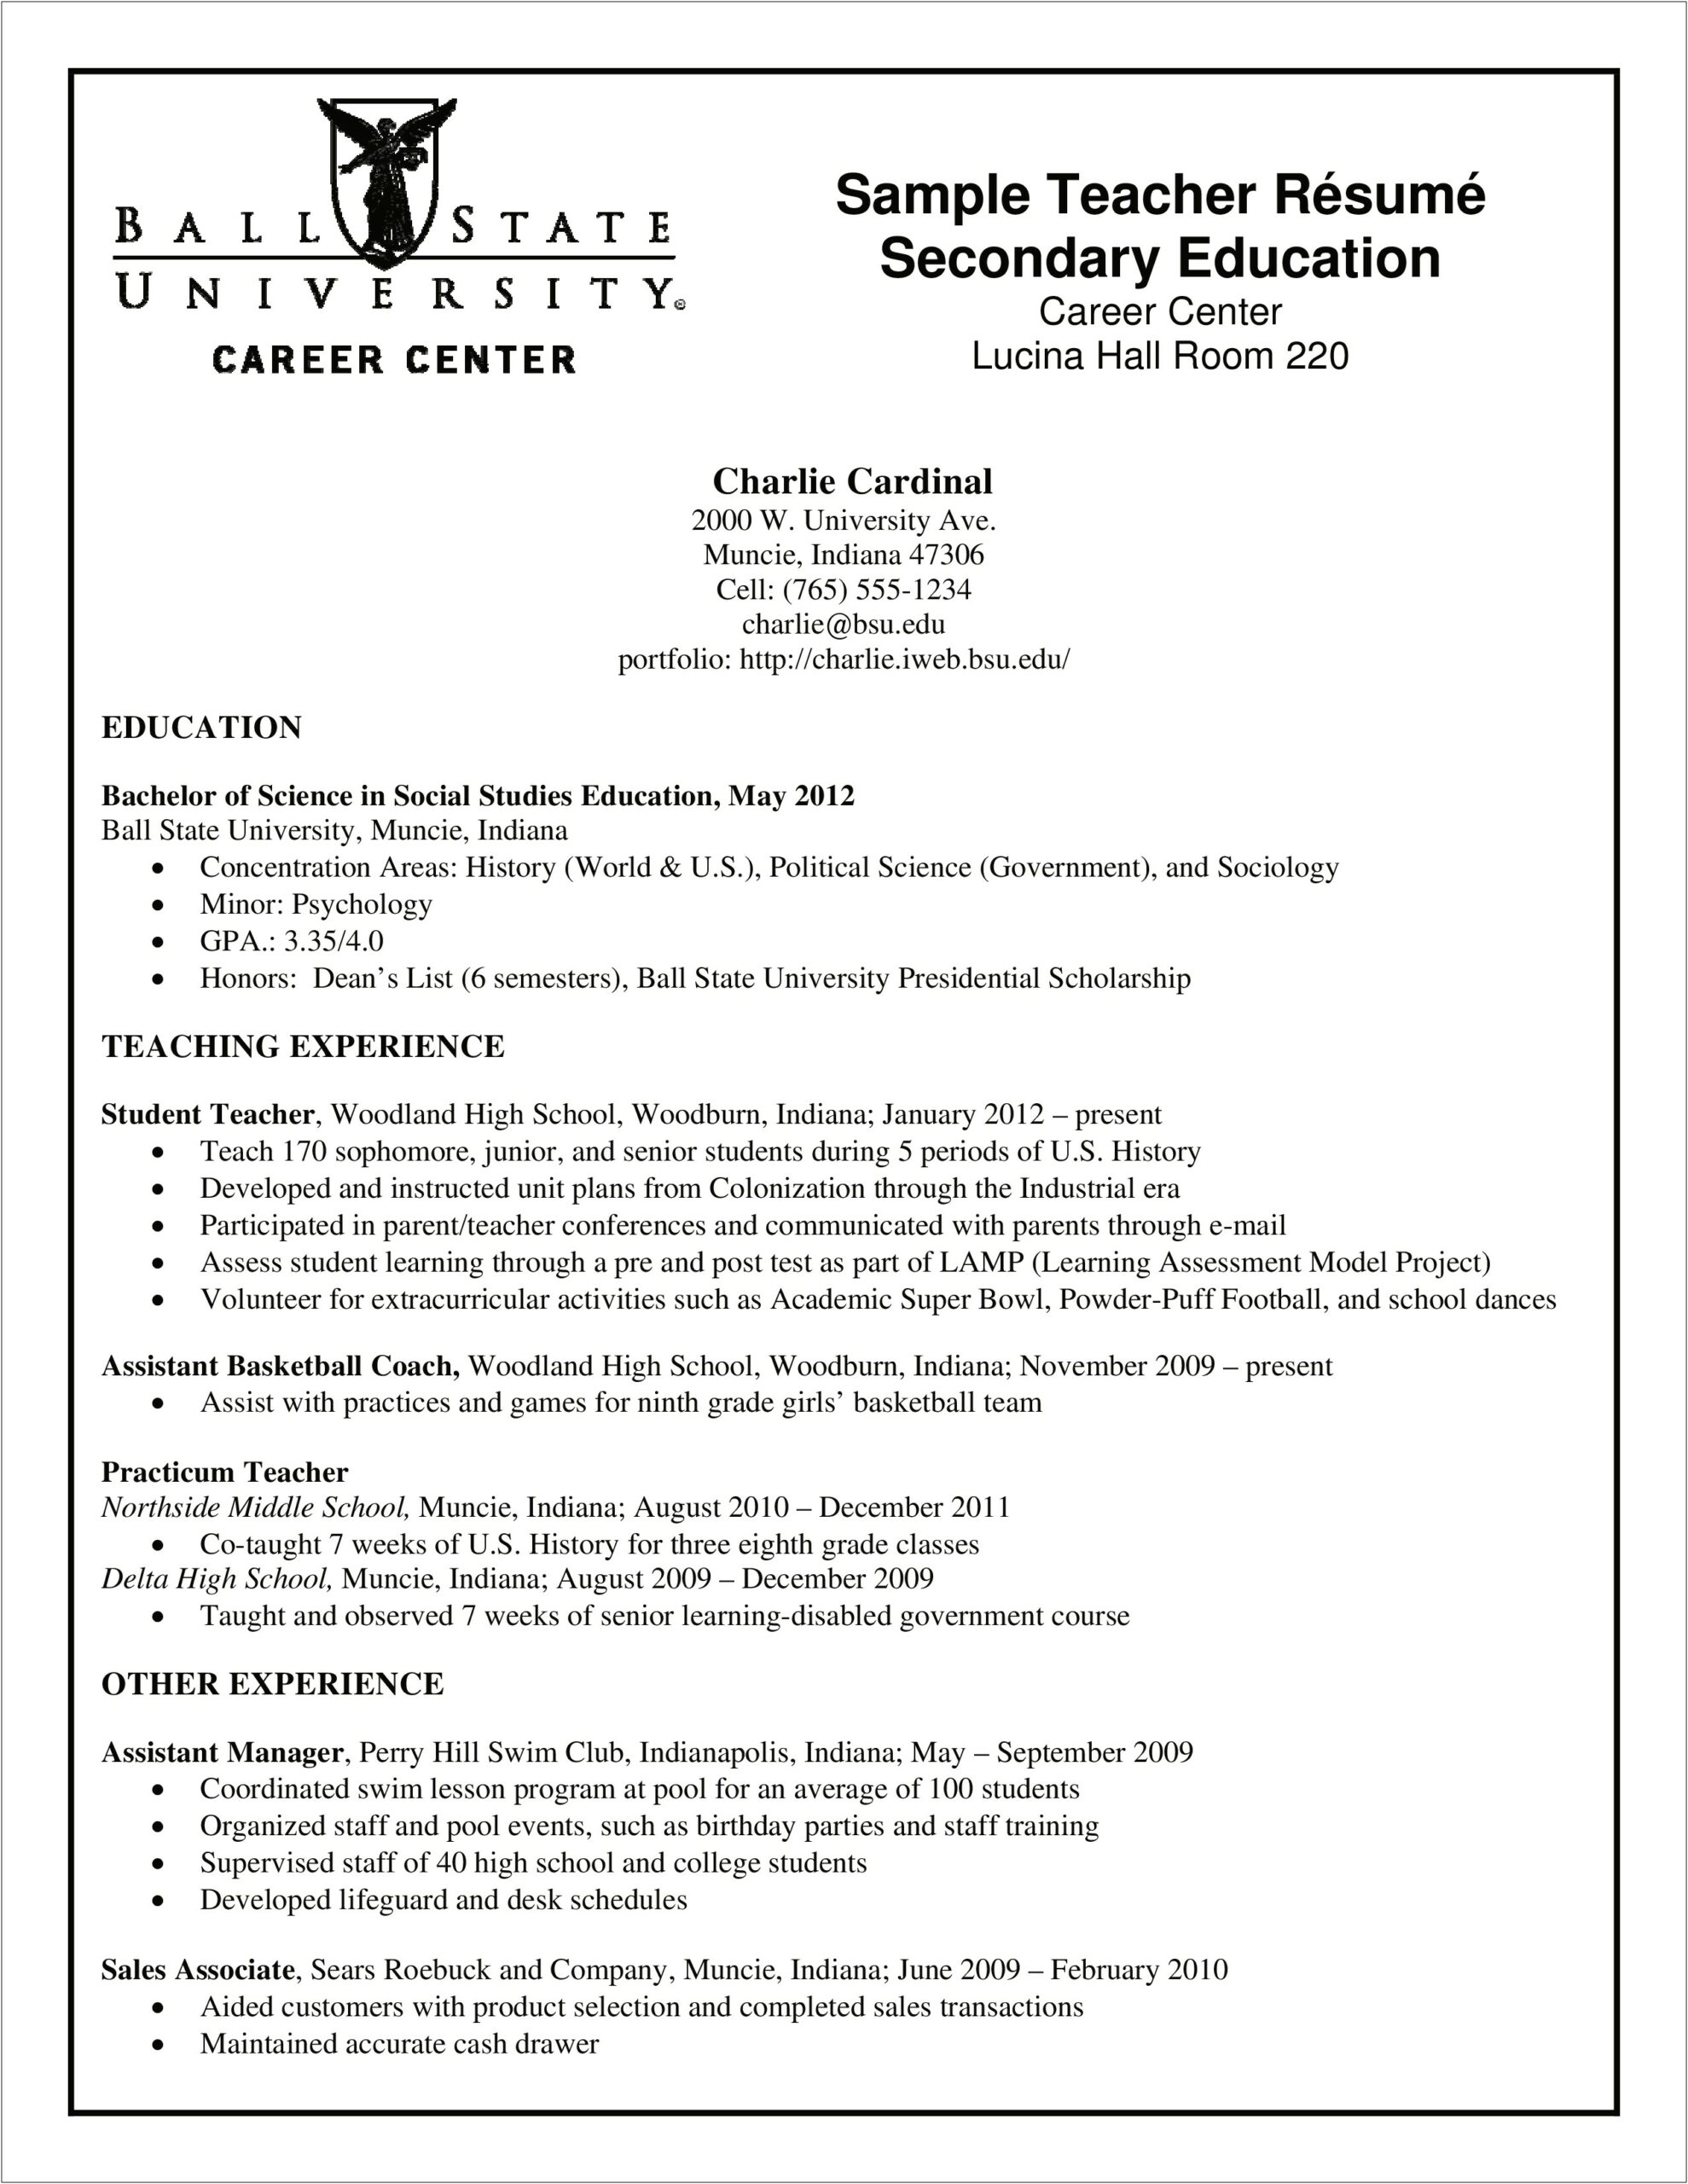 Resume Experience Section Middle School Teacher